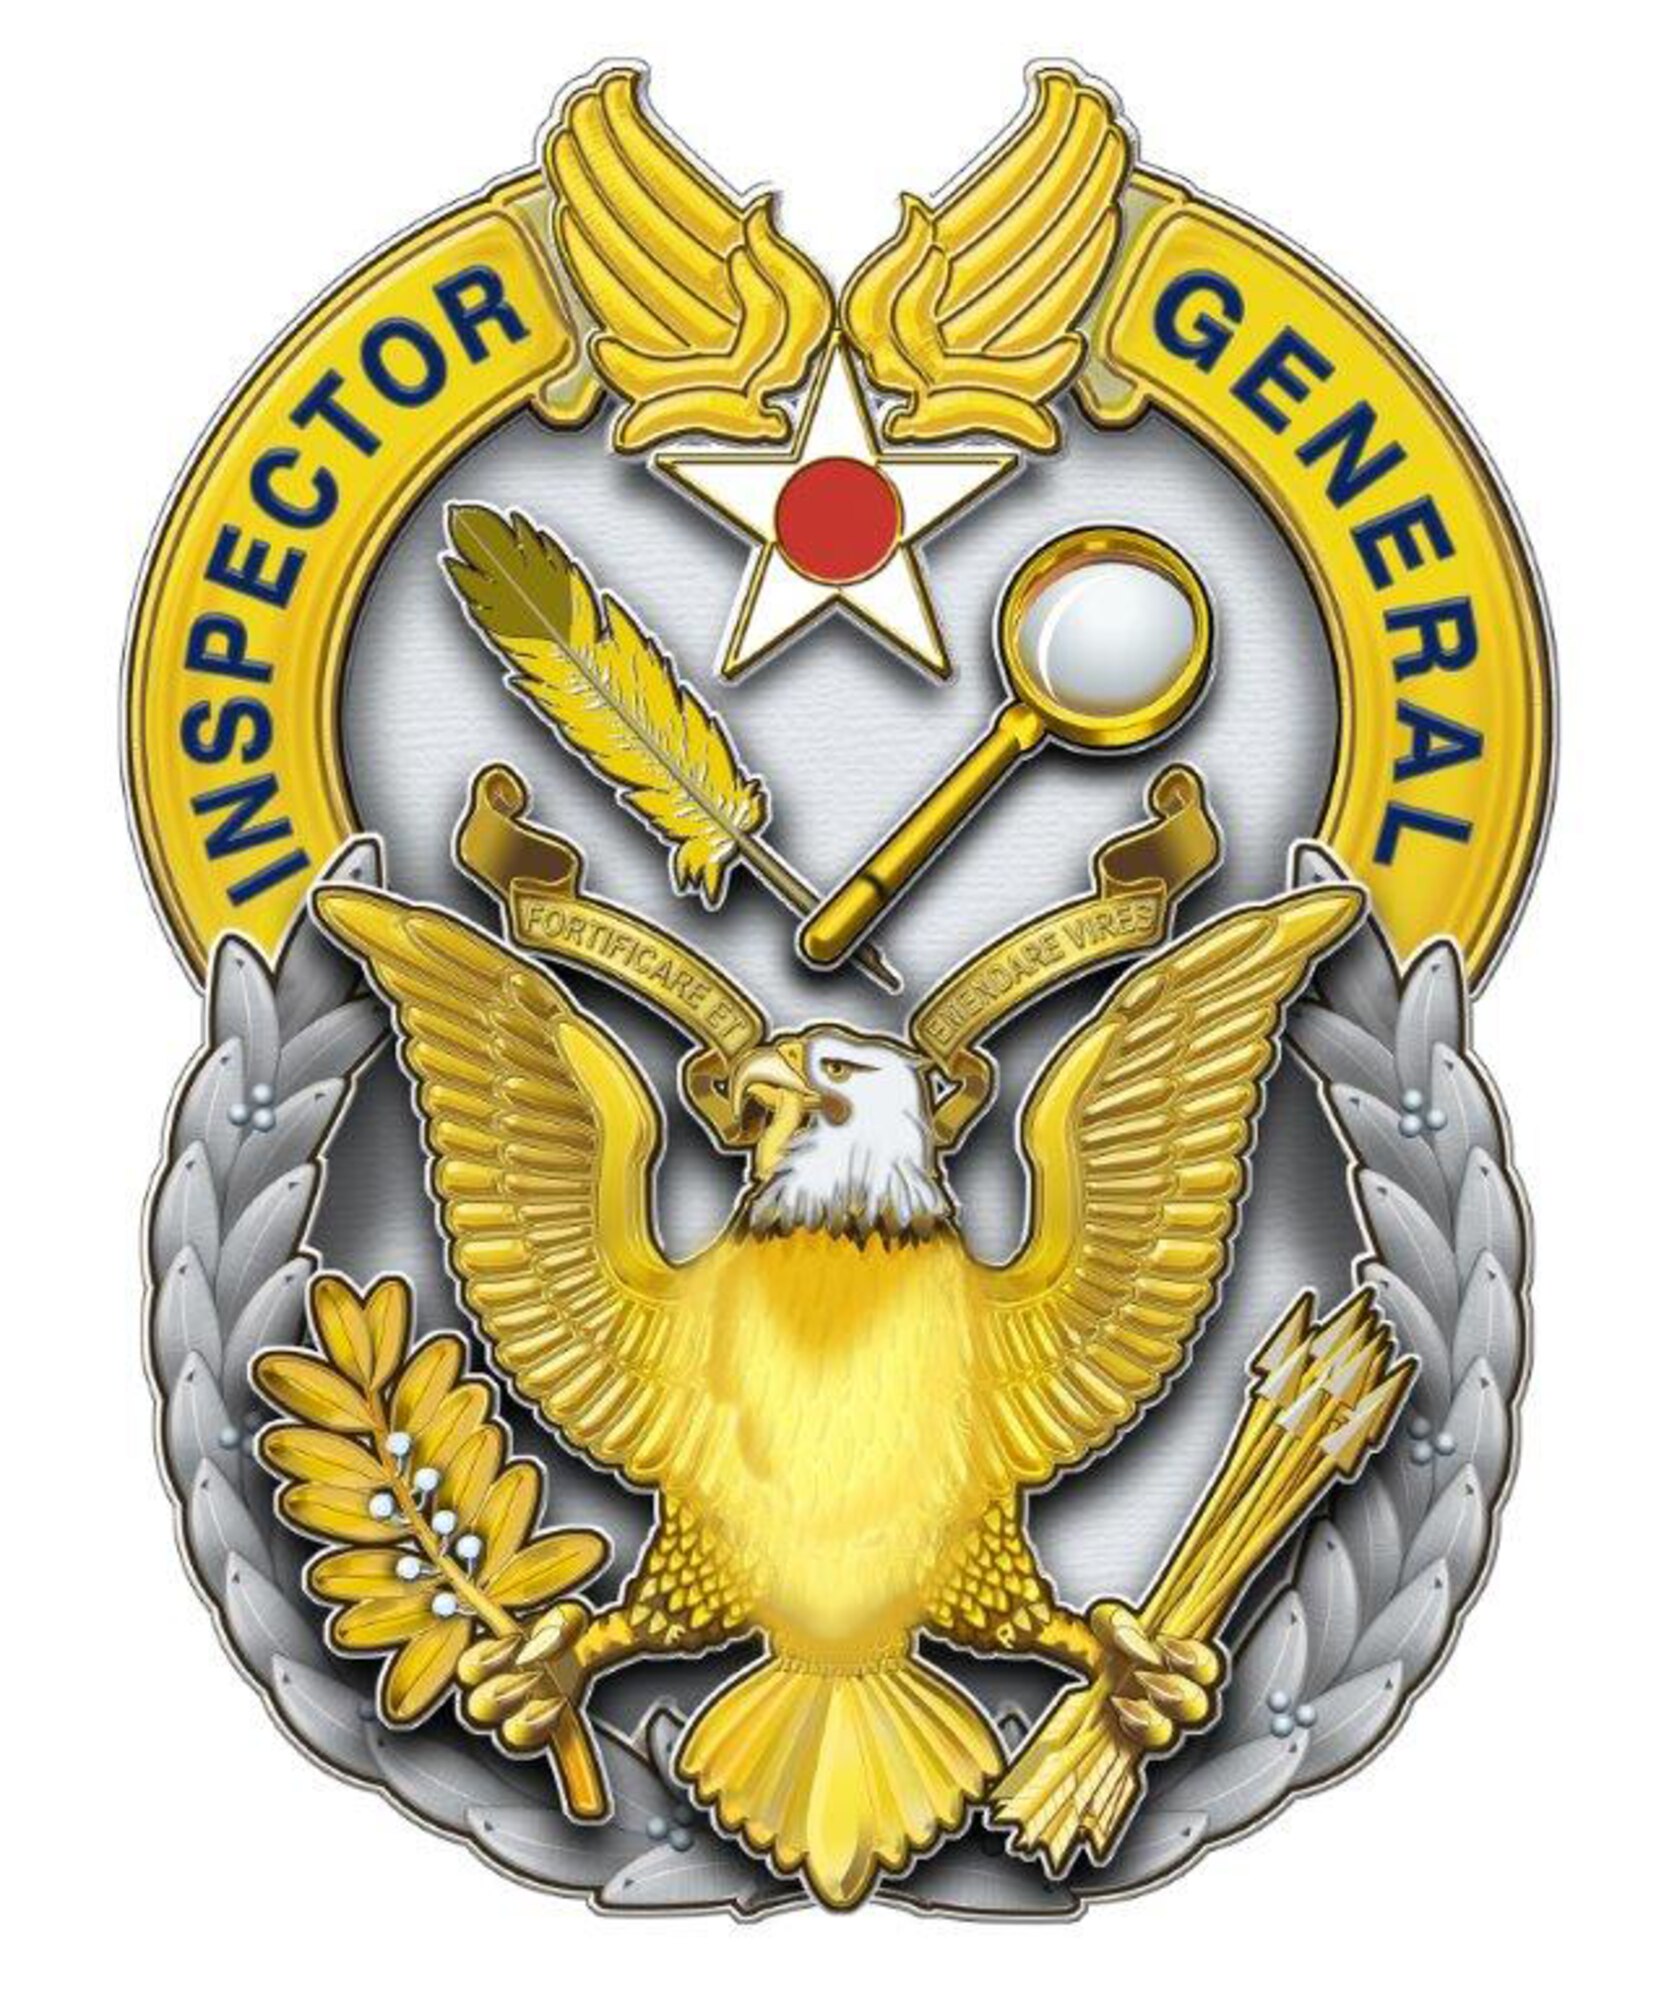 The Air Force Inspector General Badge is a duty badge authorized for wear by all personnel who are assigned to IG duty positions. 